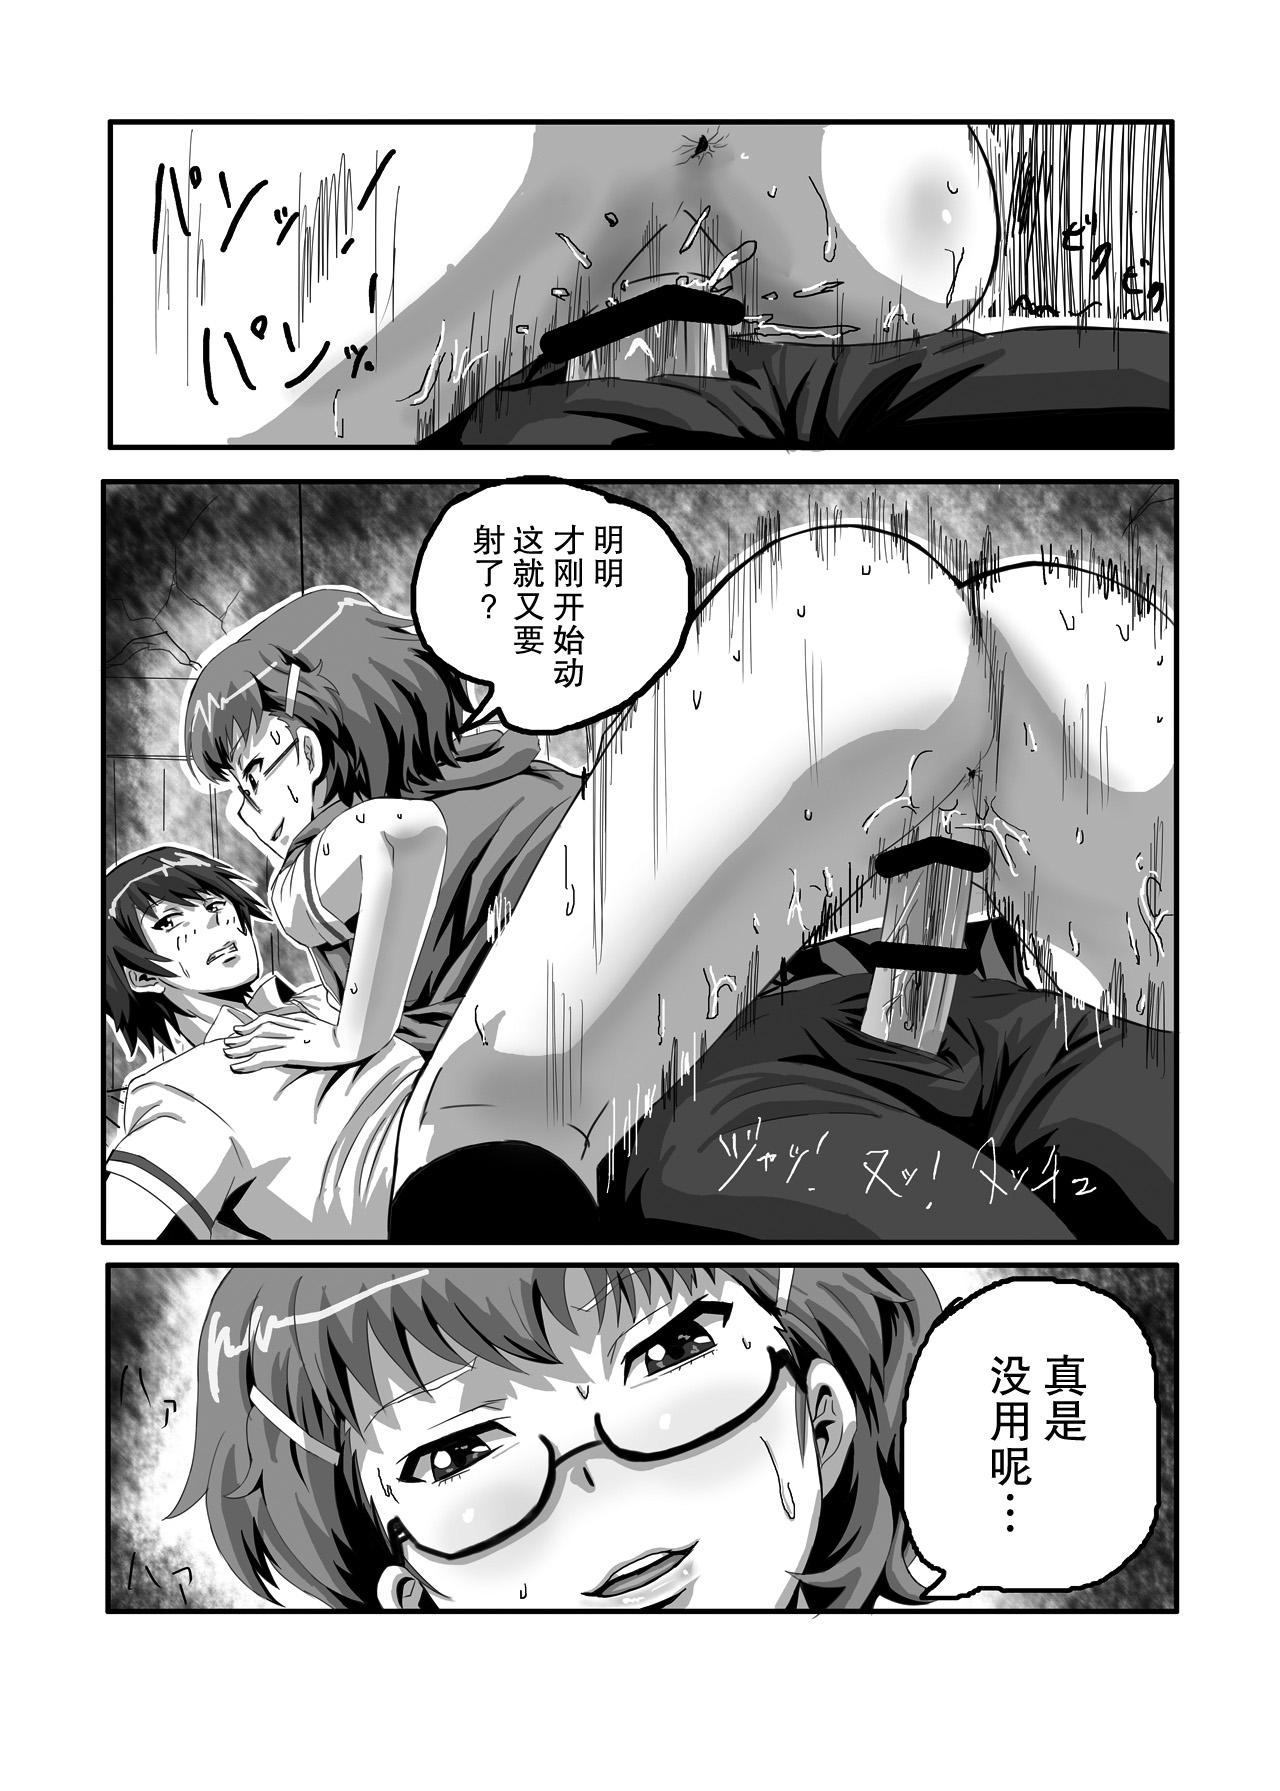 Self SugiSeme - Another Cuck - Page 10